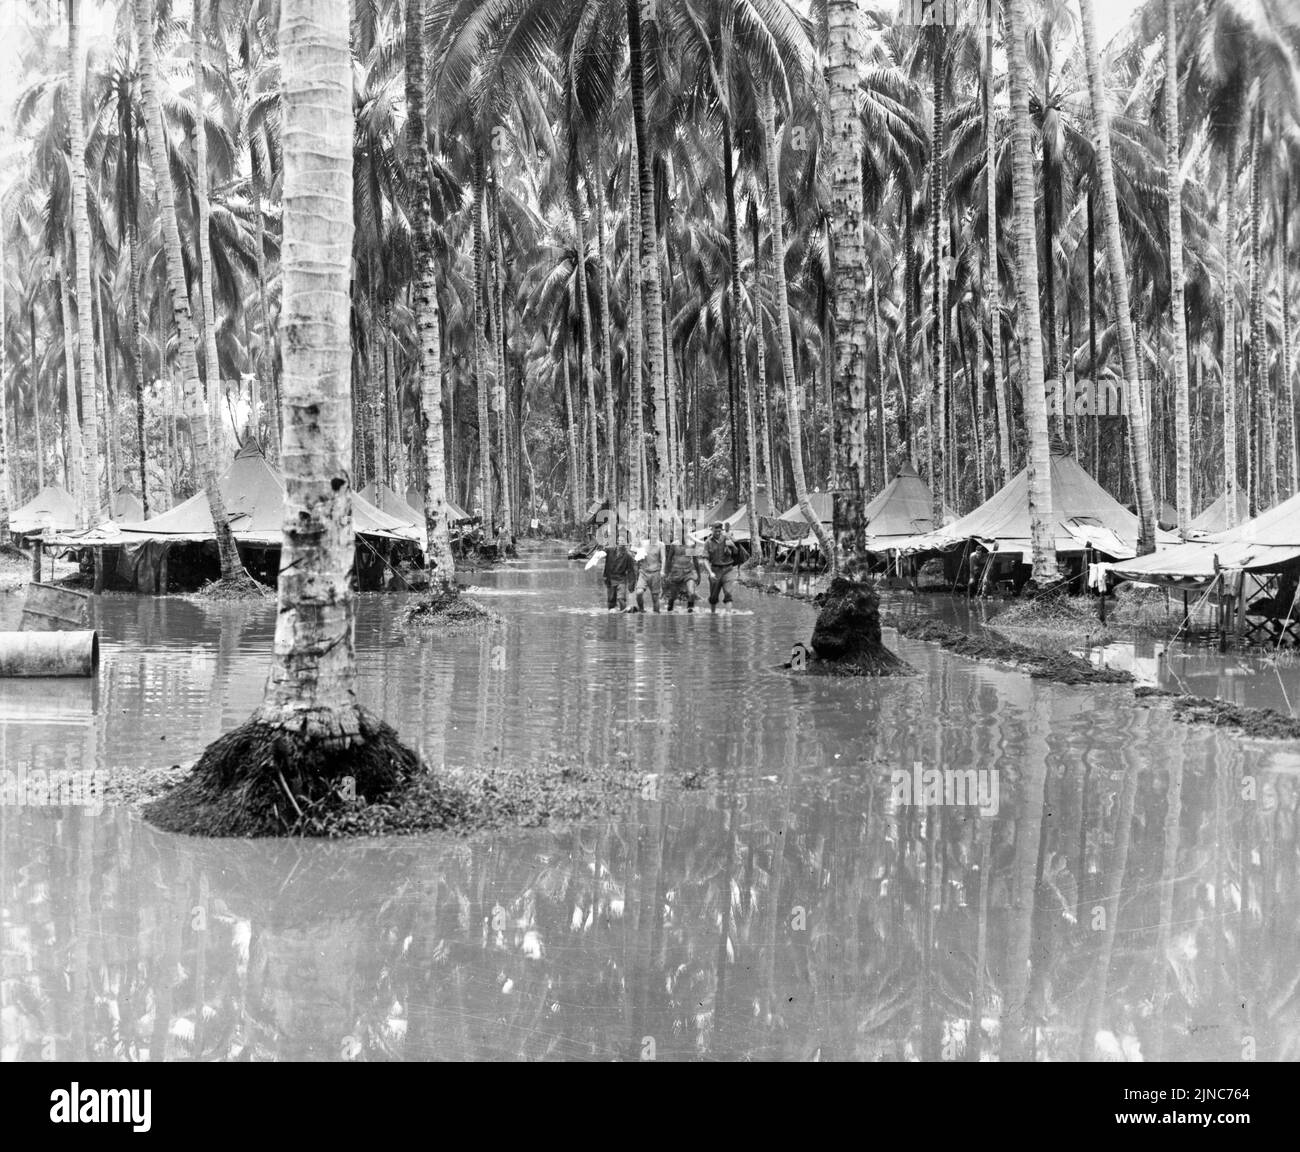 Cactus Air Force air crew wade through the flooded coconut grove where they have pitched their tents near Henderson Field airstrip on Guadalcanal. . The Cactus Air Force was the nickname of the aviation unit that was based on this airstrip during WW2. Stock Photo